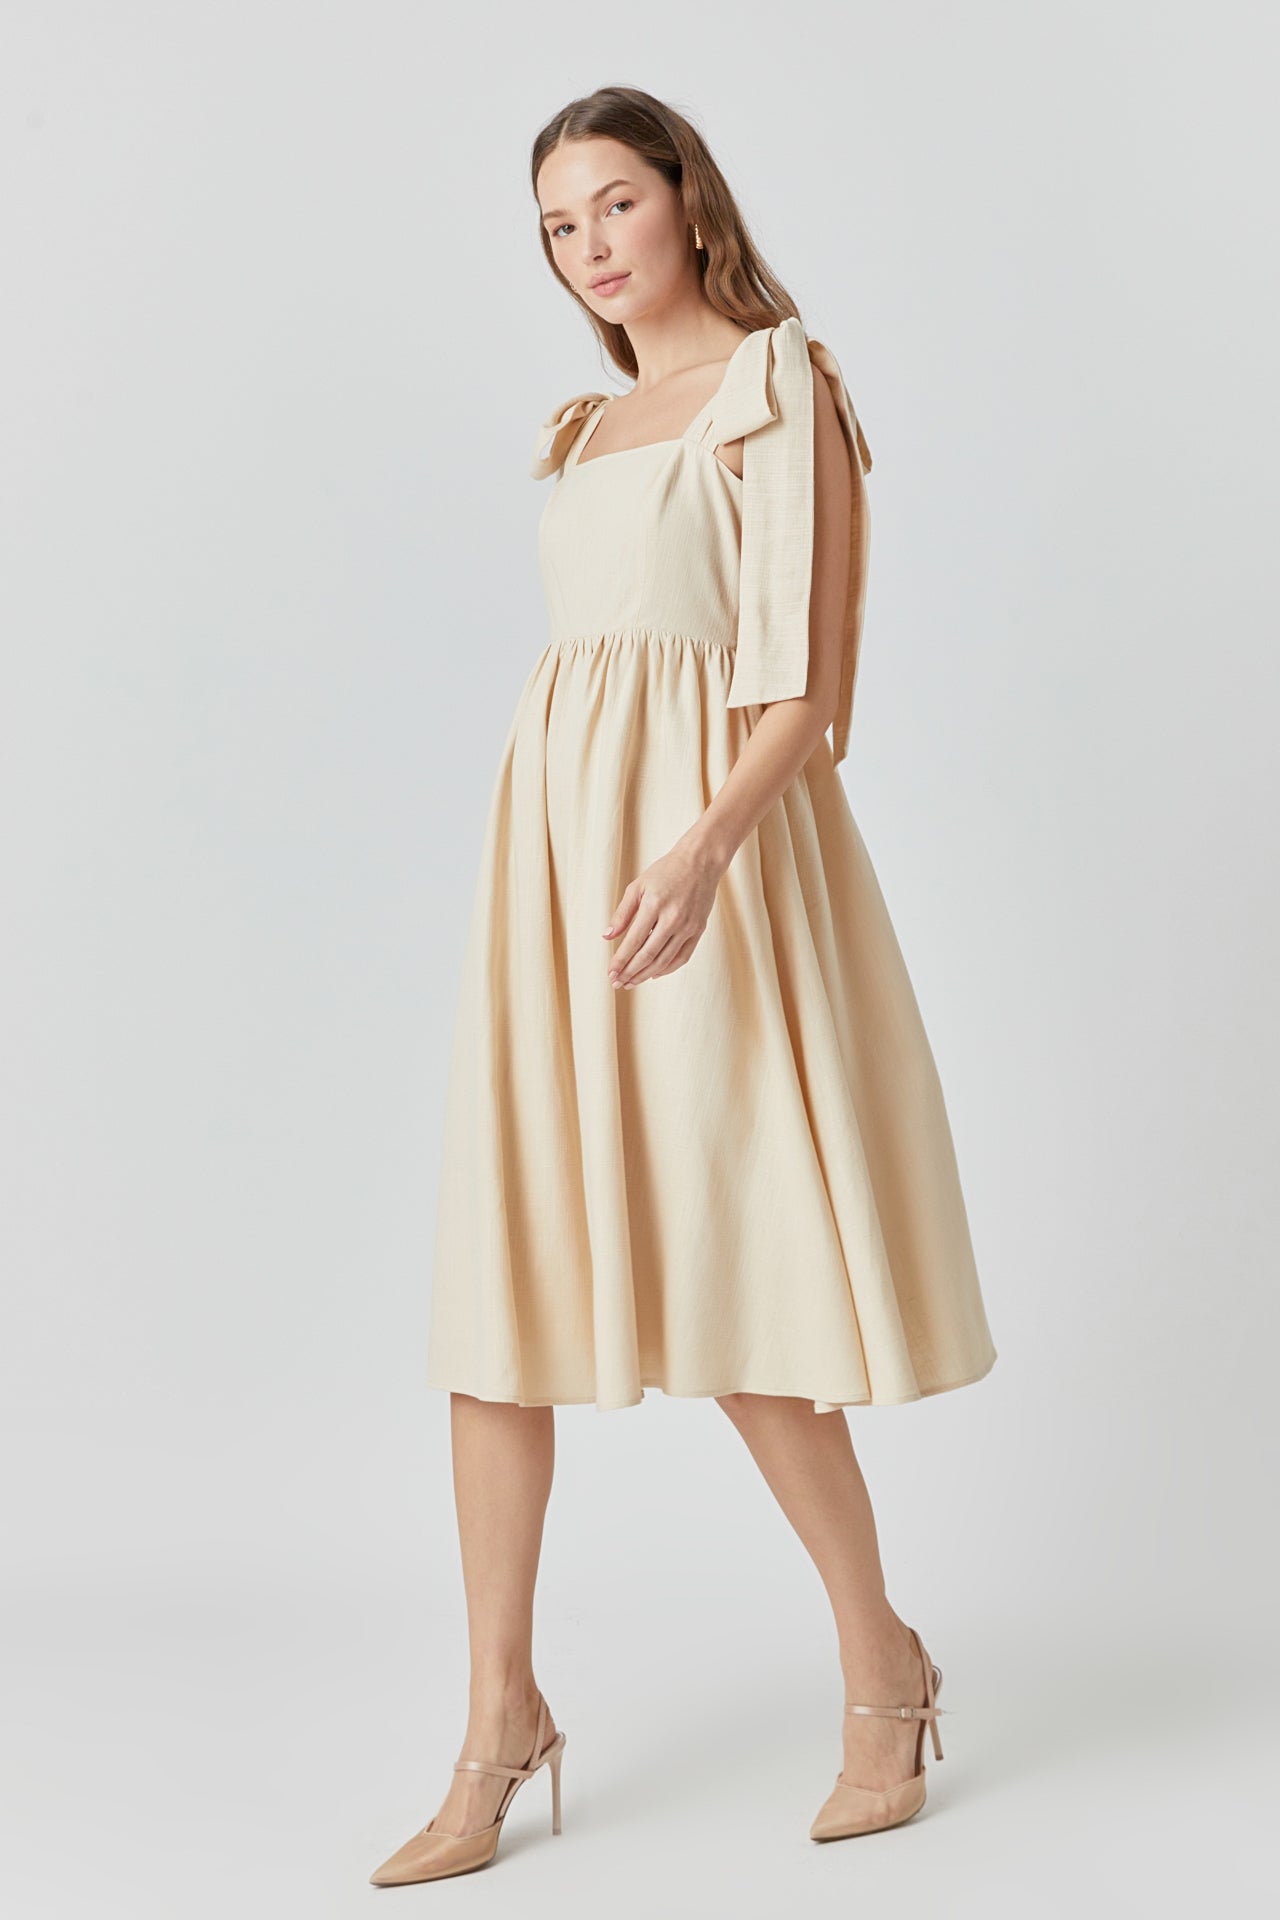 ENDLESS ROSE - Bow Shoulder Tie Midi Dress - DRESSES available at Objectrare